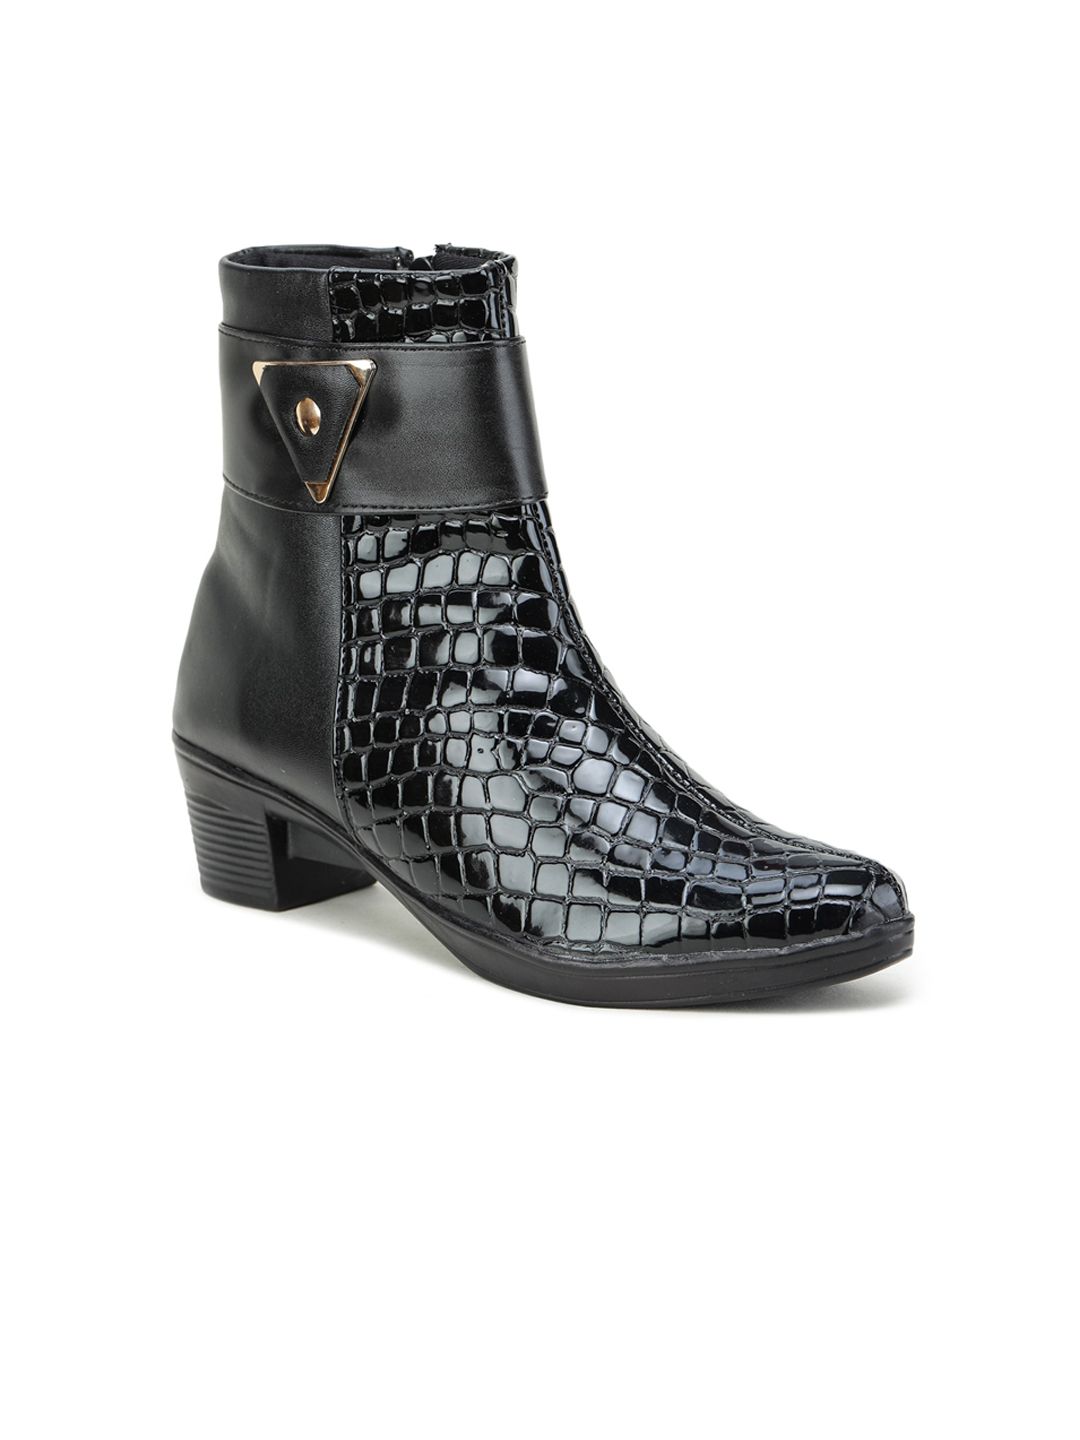 TRASE Women Black HIgh-Top Block Heeled Boots Price in India